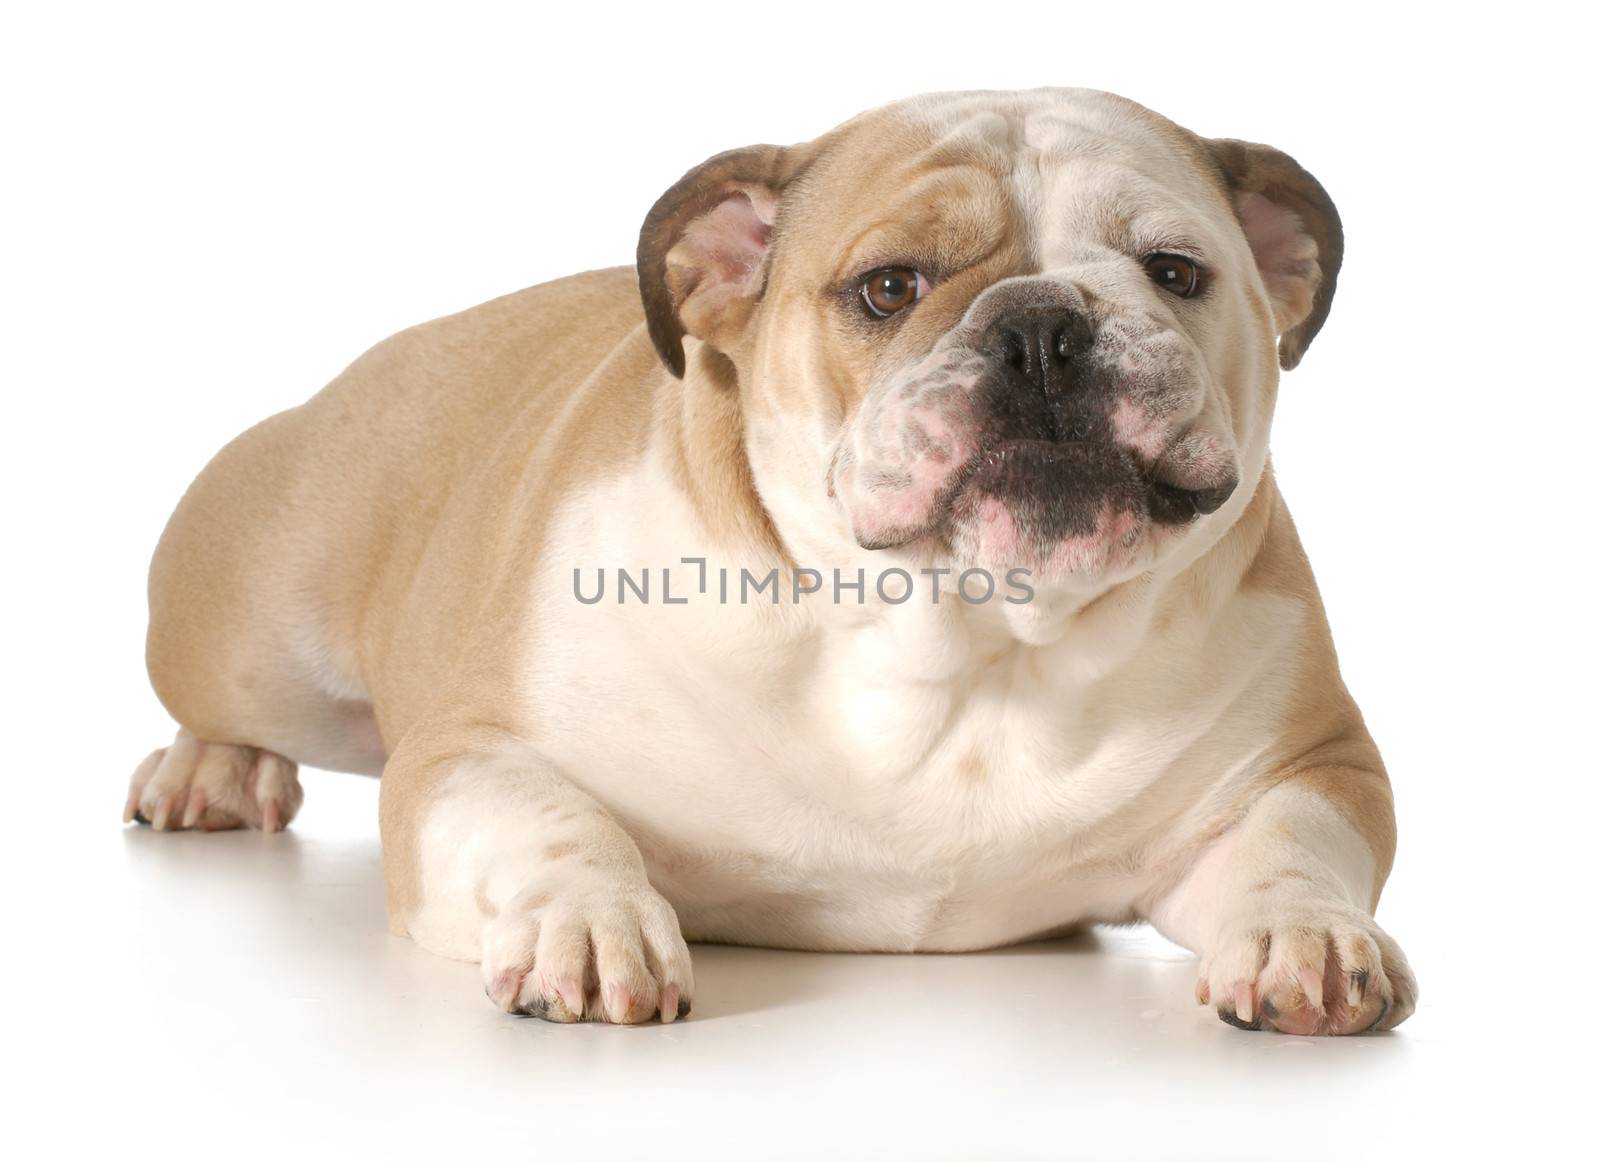 english bulldog with silly expression laying down isolated on white background - 2 years old